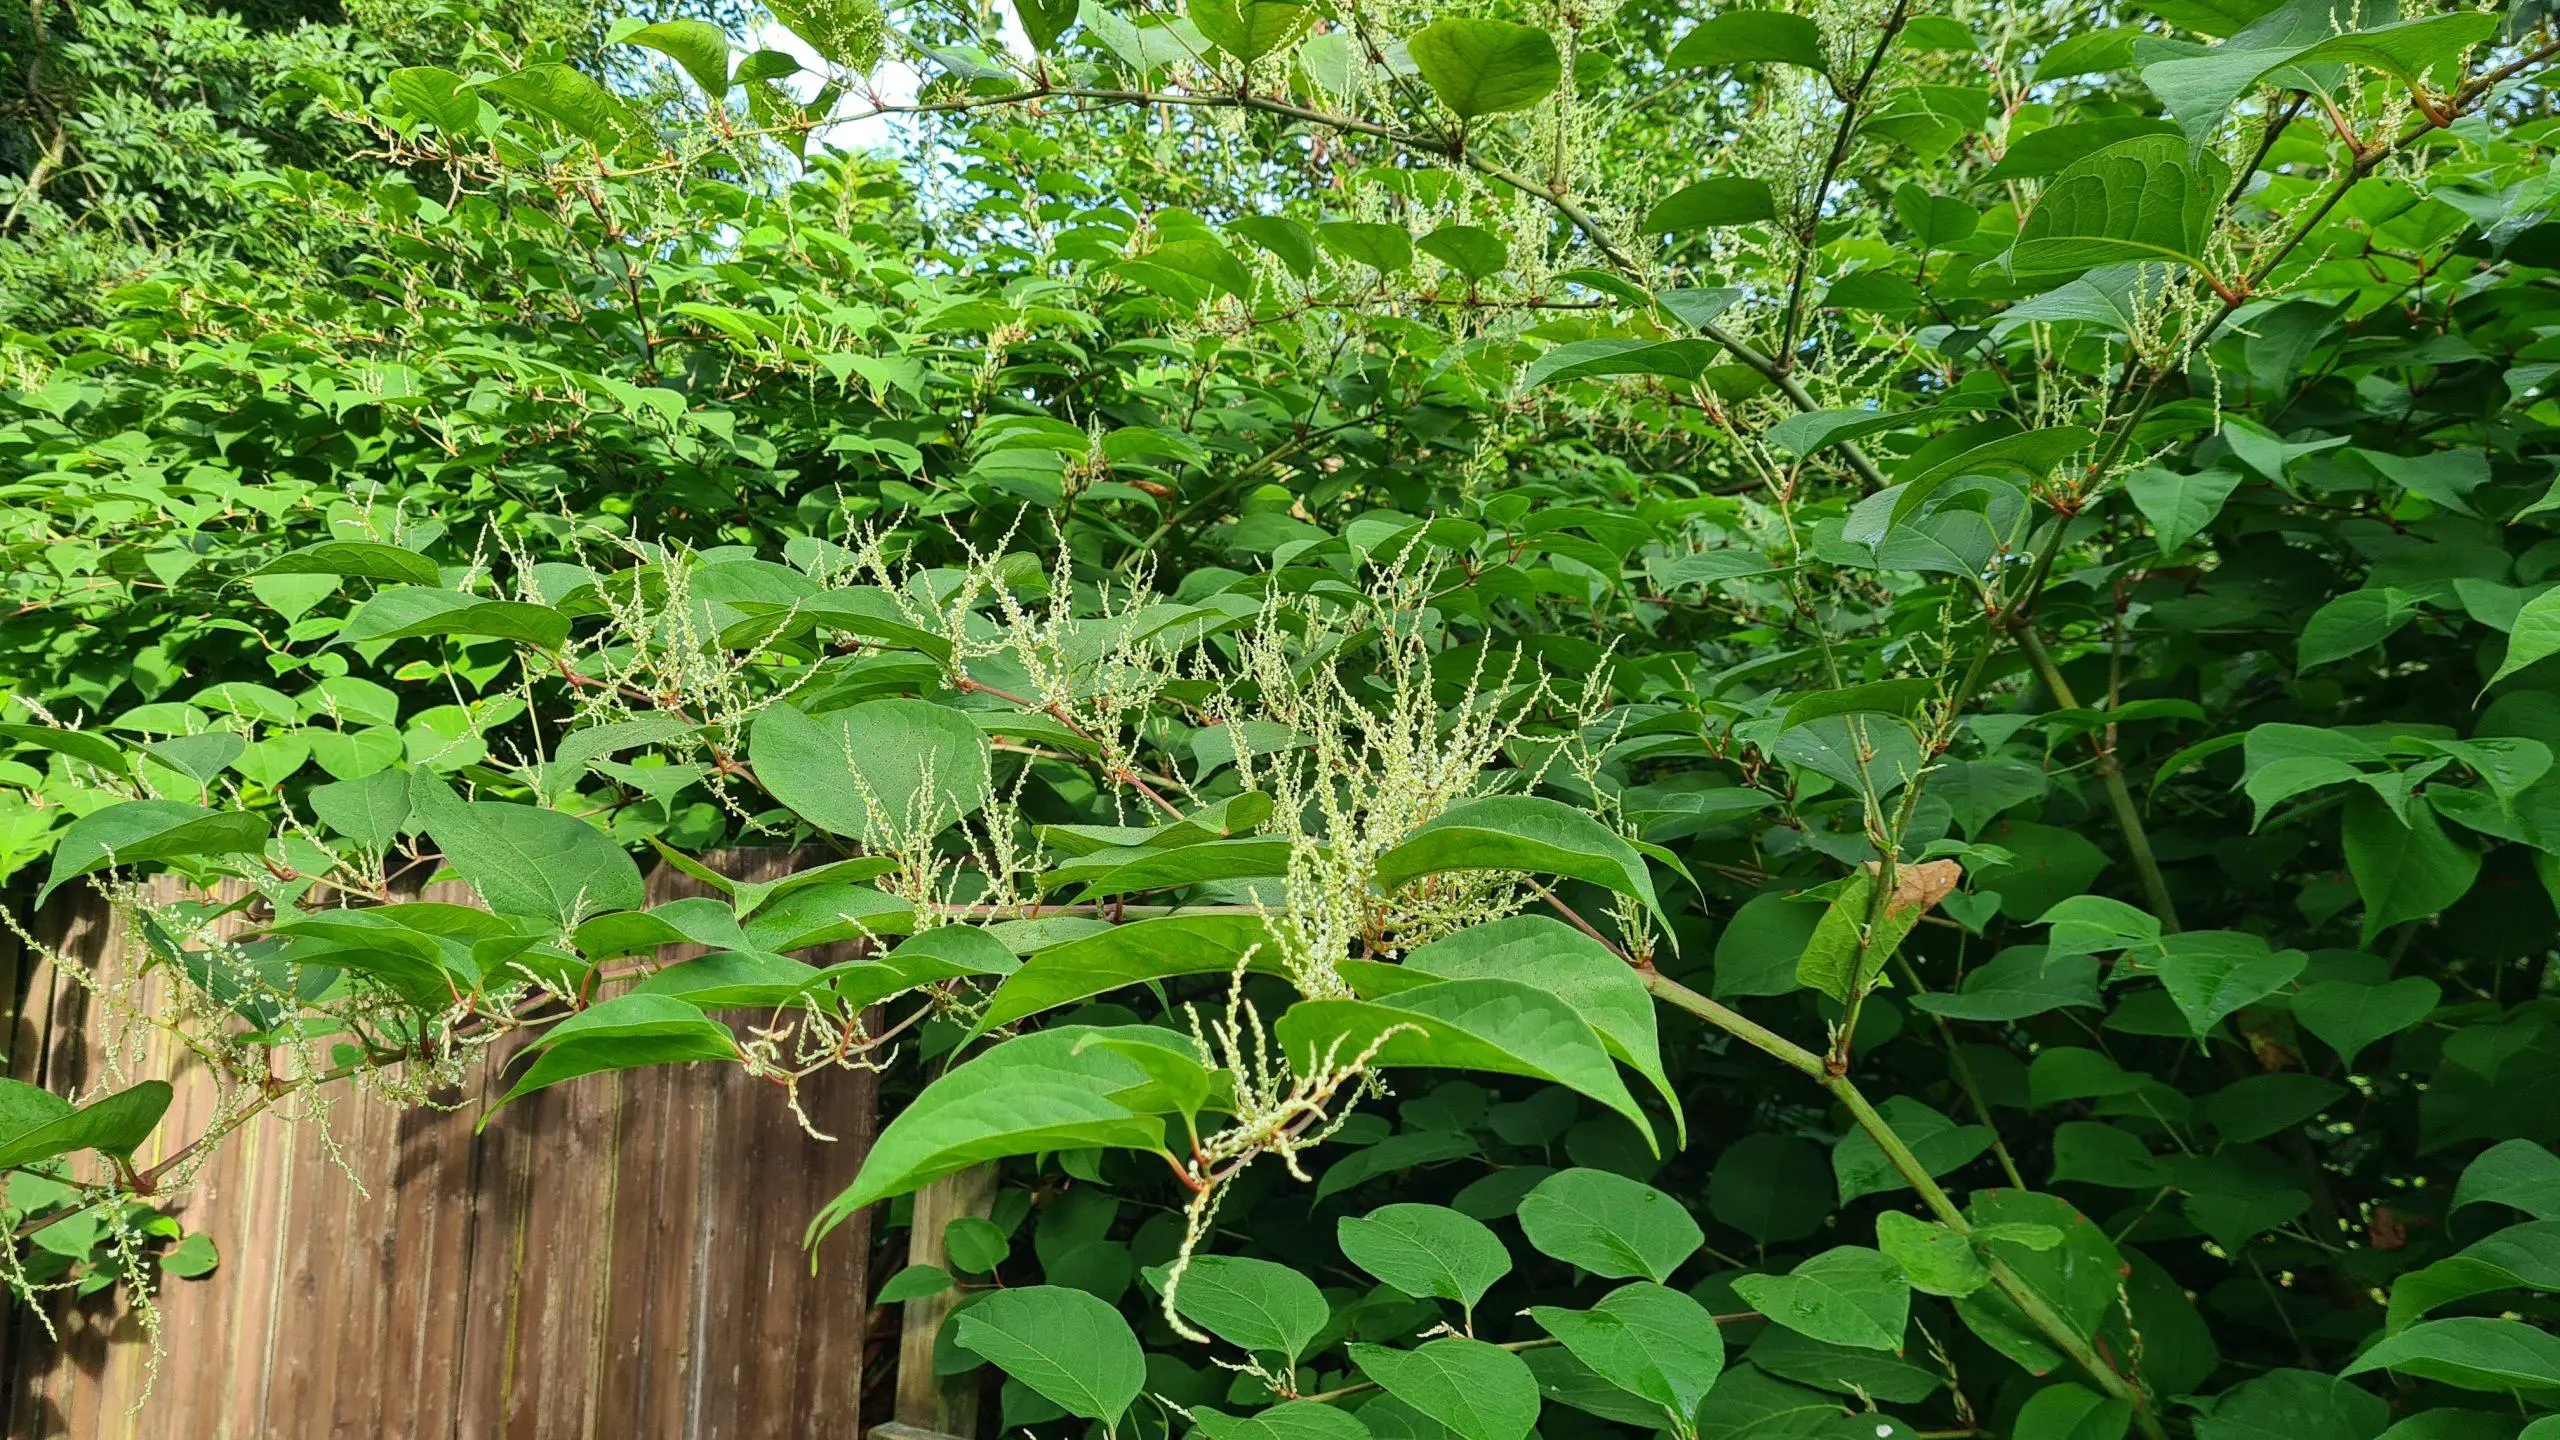 Infestation of Japanese knotweed invading another property over their fence